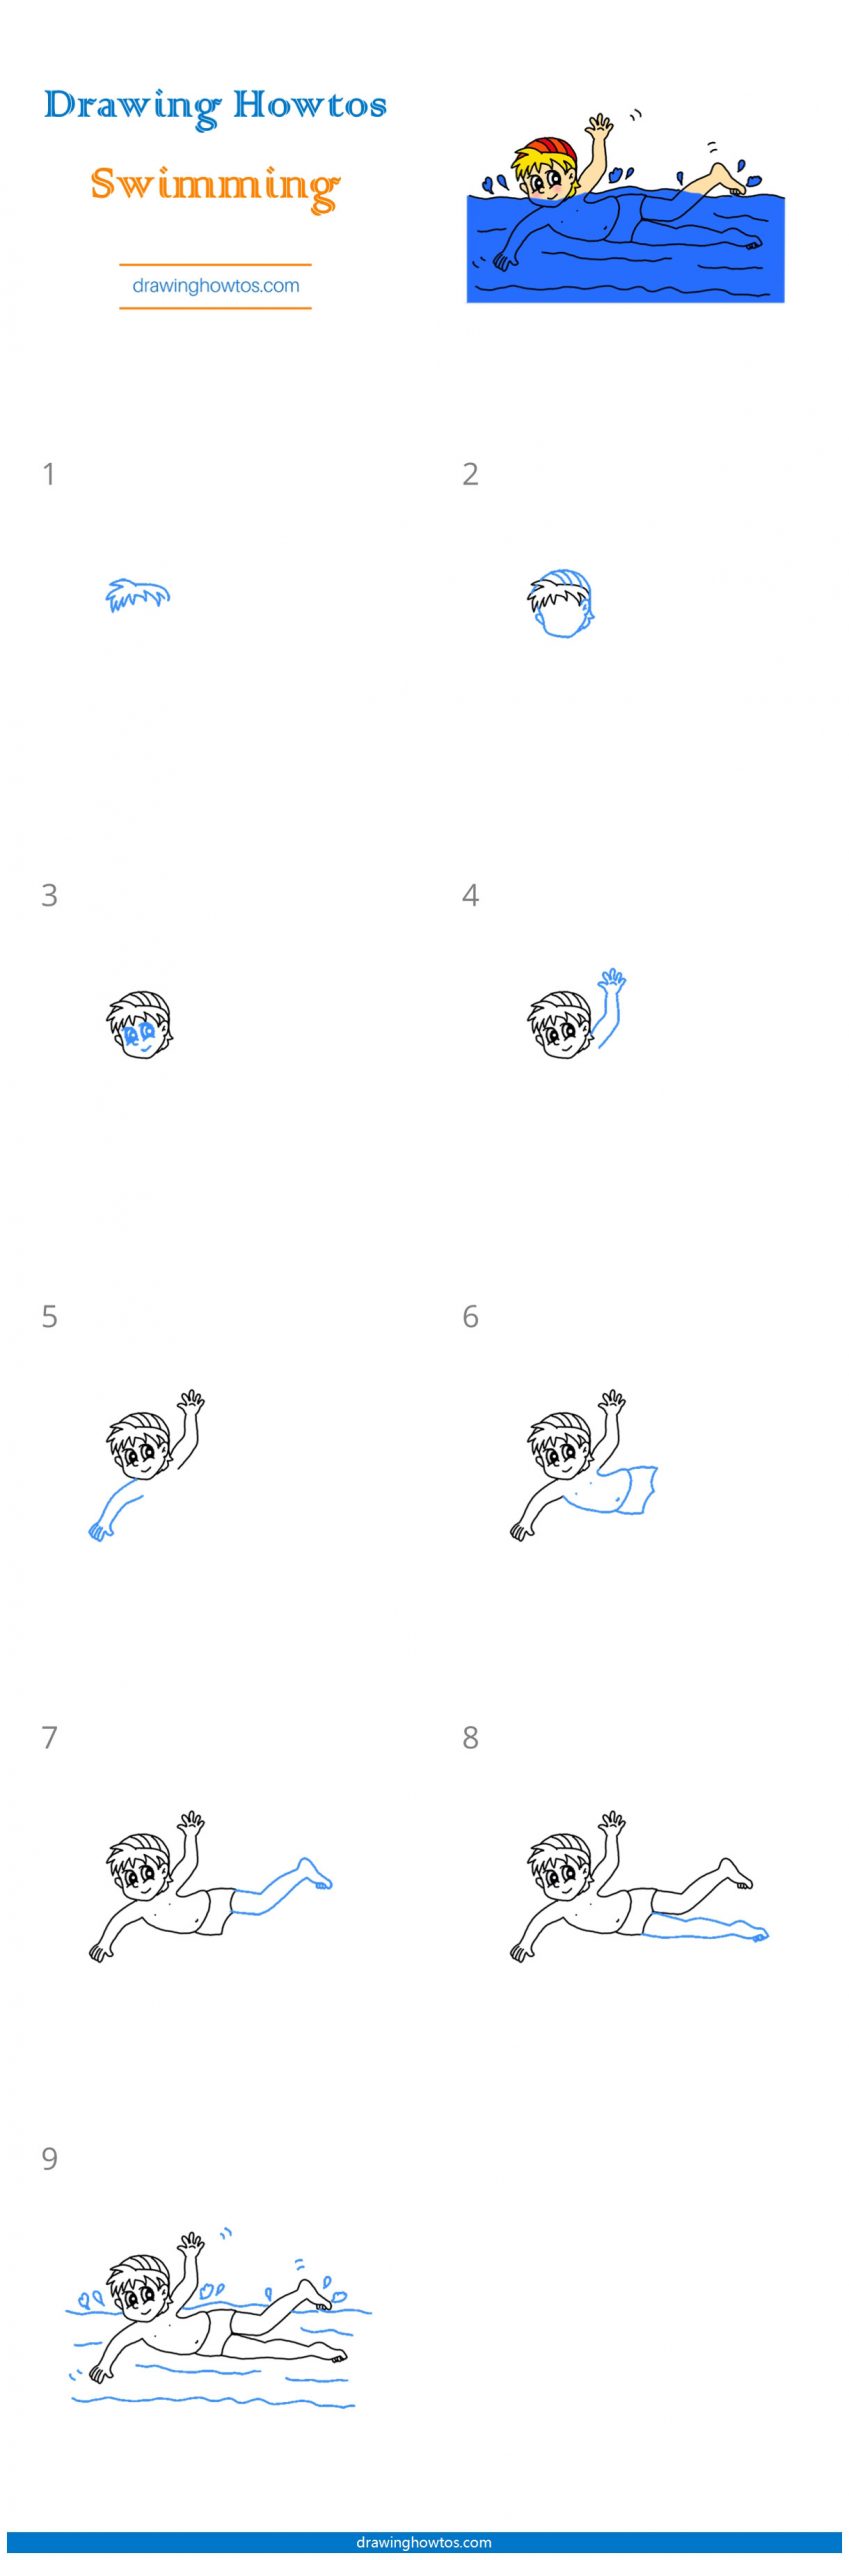 How to Draw Swimming Step by Step